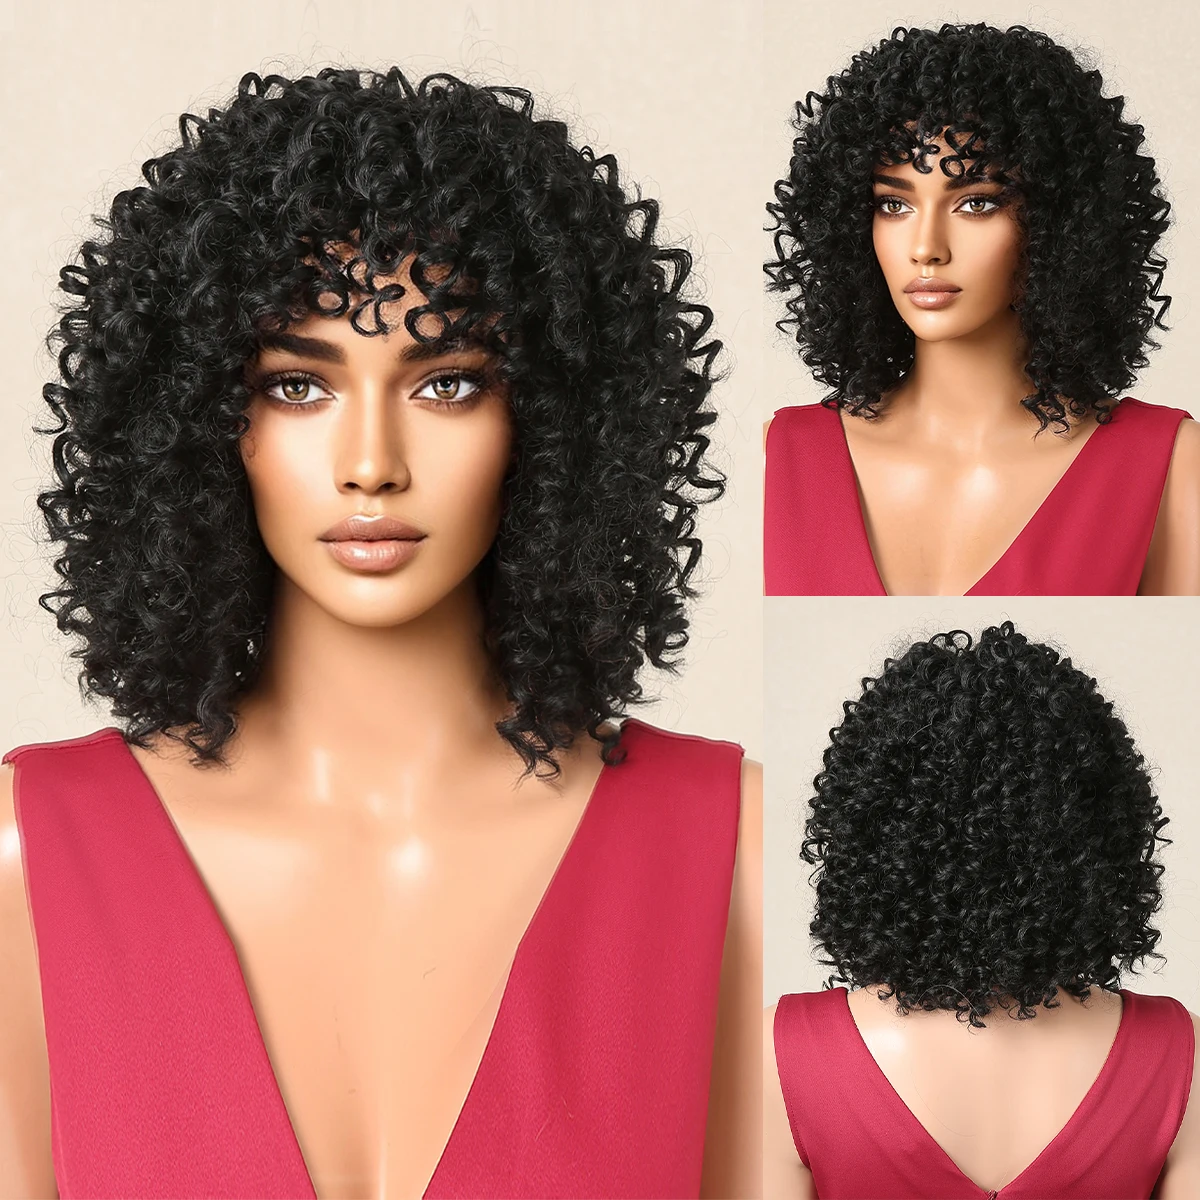 

Blcak Kinky Curly Wave Synthetic Wig with Bangs Natural Glueless Deep Wavy Afro Wig for Women Daily Cosplay Heat Resistant Fiber